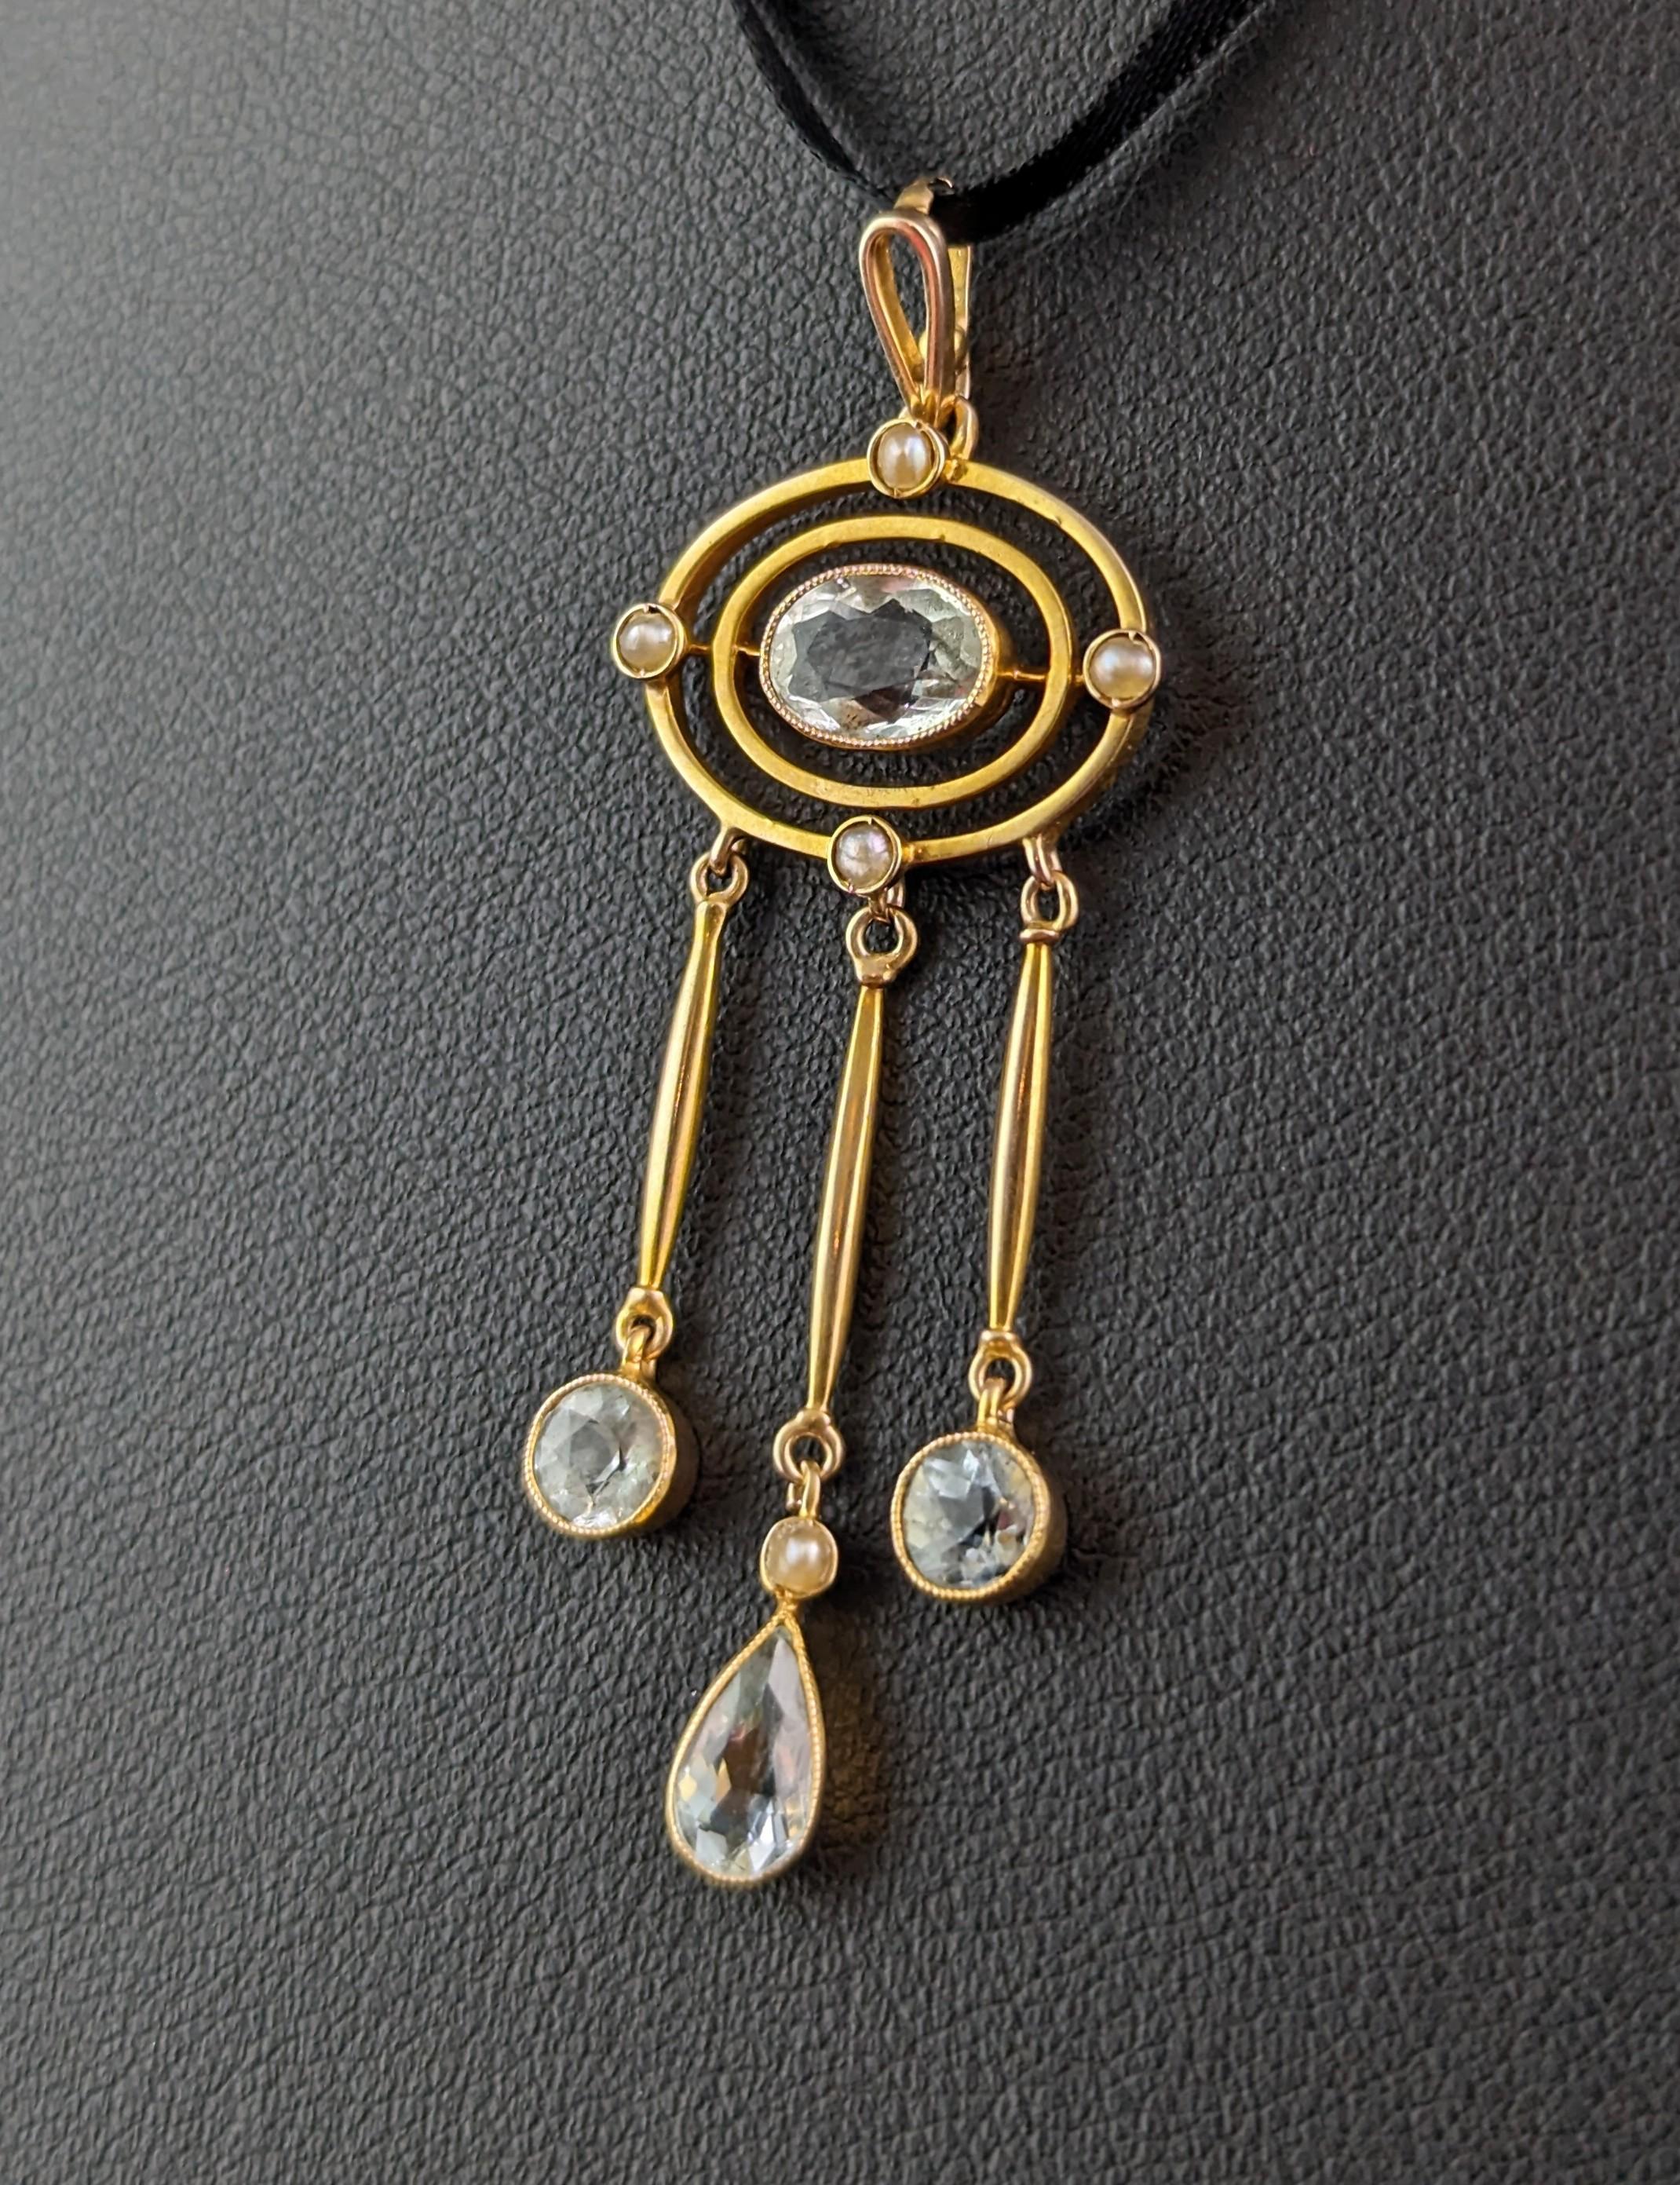 Oval Cut Antique Aquamarine drop pendant, 15k yellow gold, Pearl For Sale